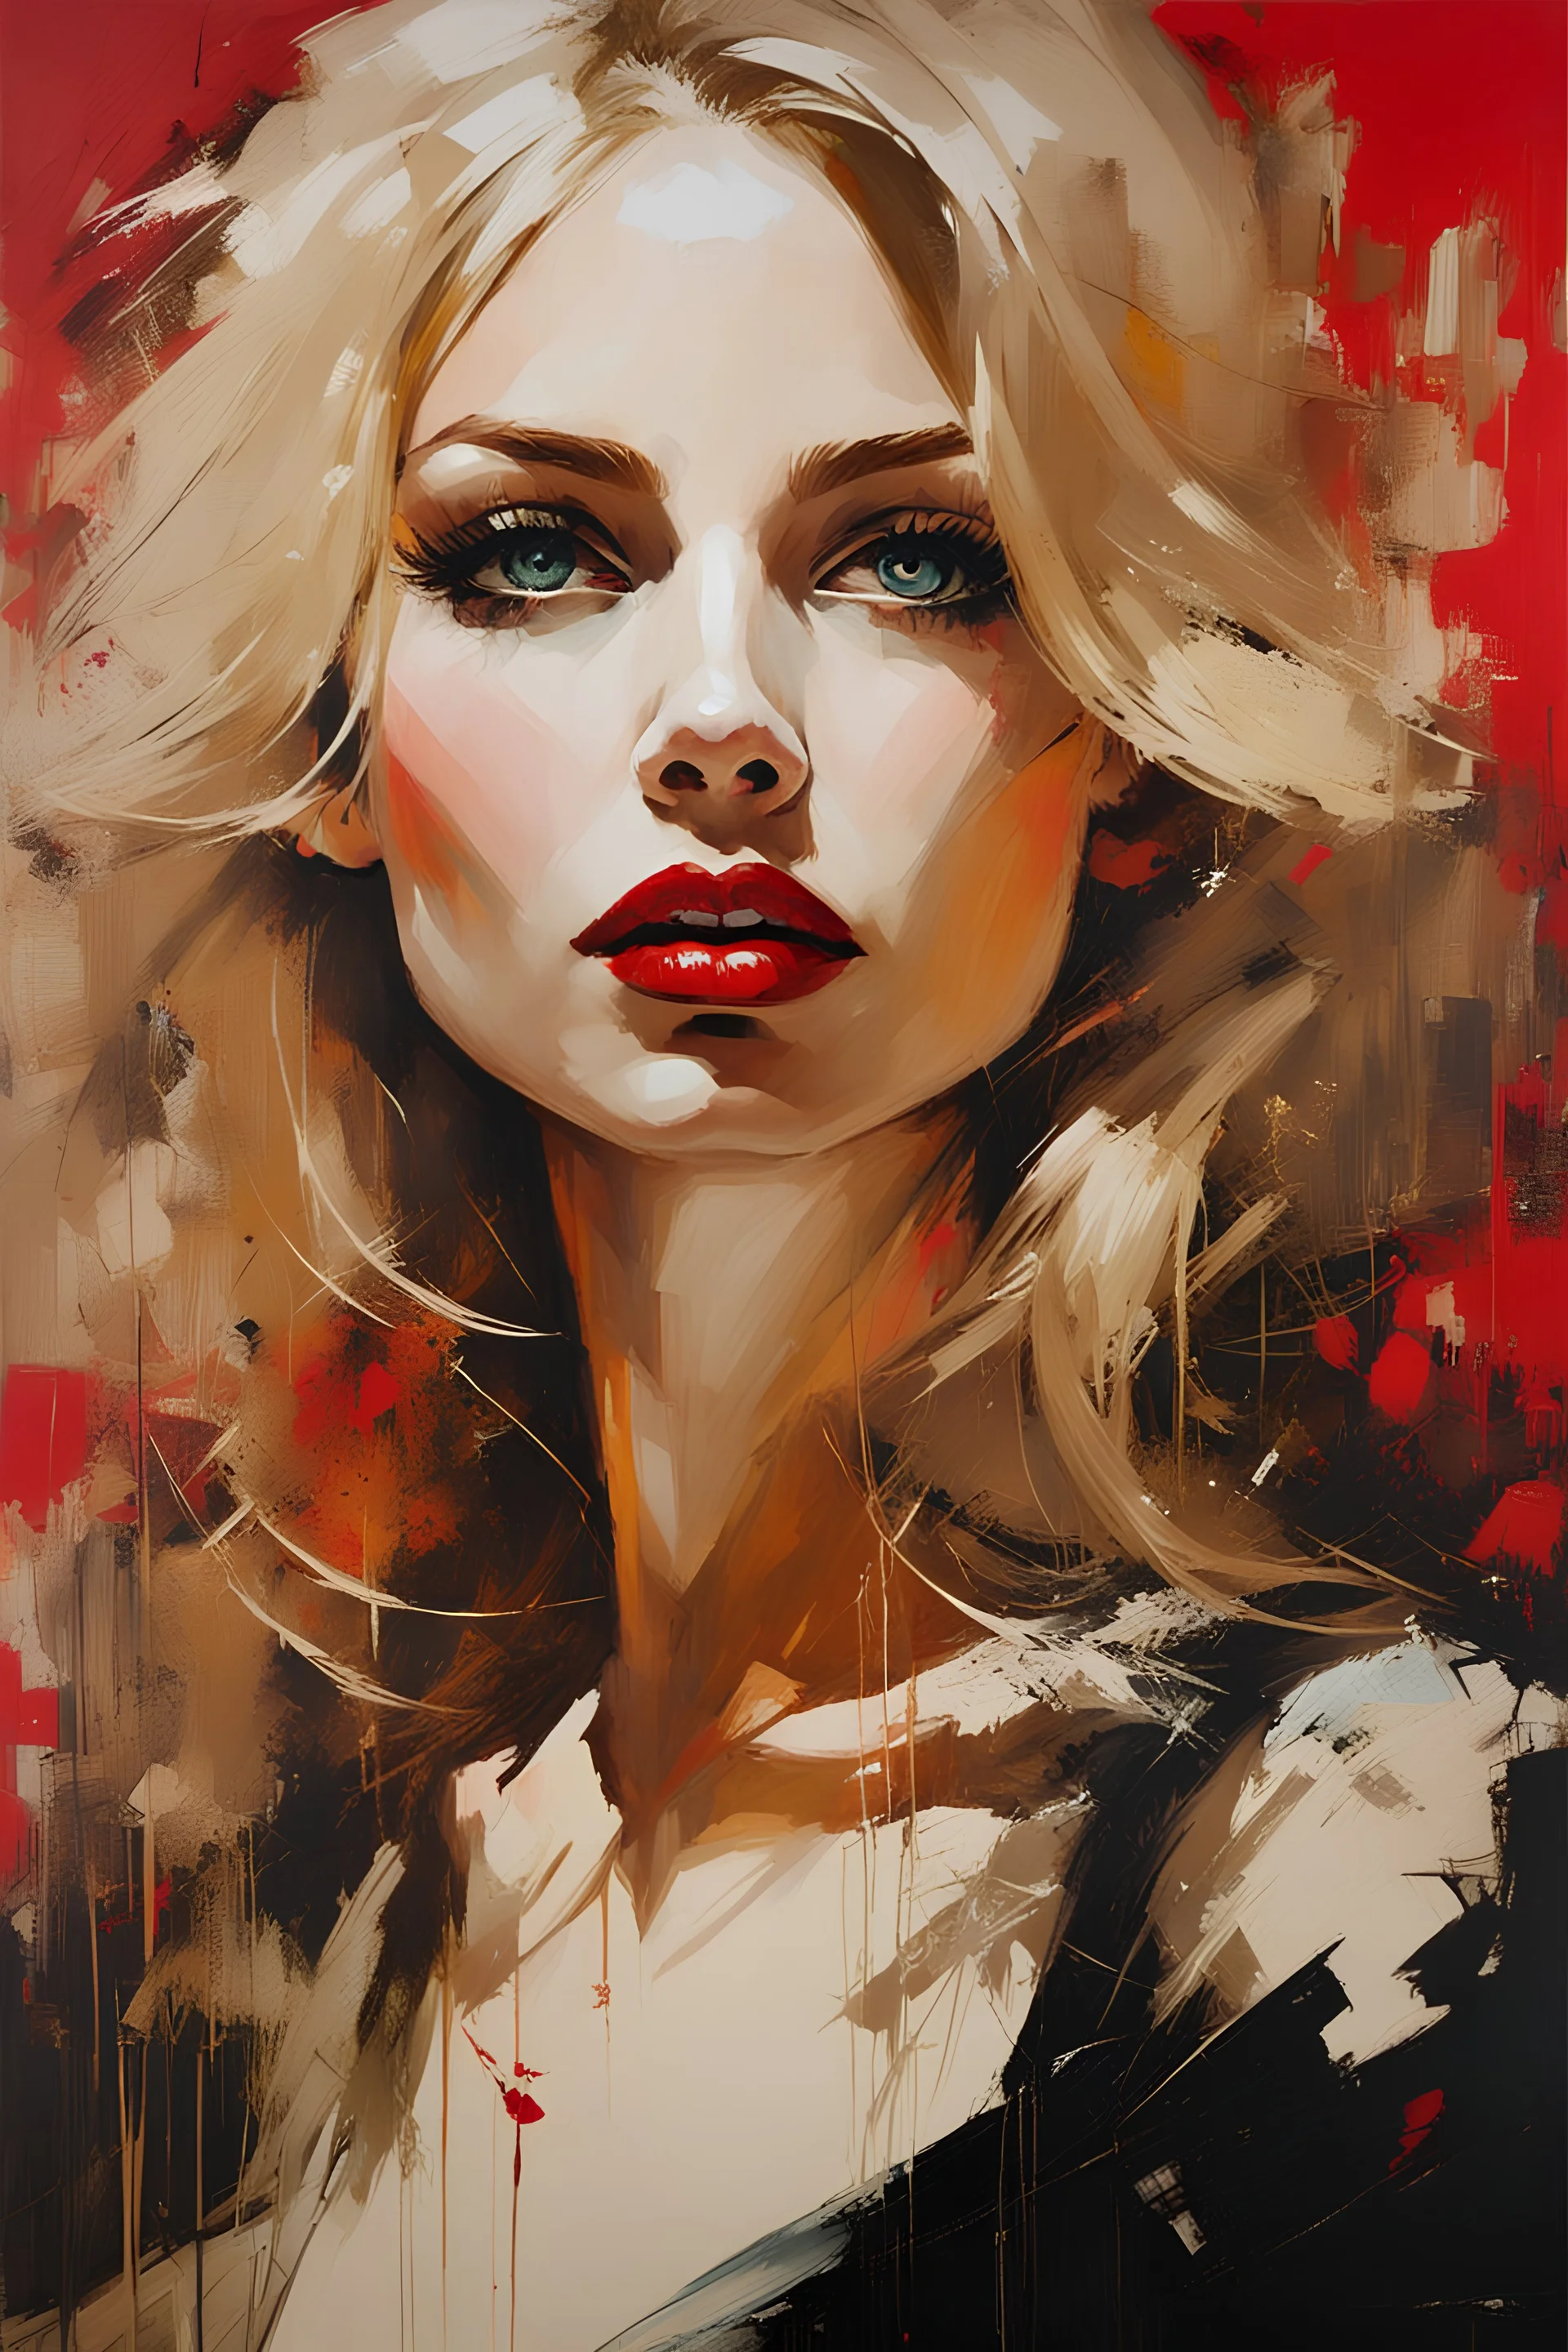 Blonde Pale Very Thin Scandinavian Woman 30yo, Big Eyes, red lipstick, Long Eyelashes And Eye Shadow :: by Robert McGinnis + Jeremy Mann + Carne Griffiths + Leonid Afremov, black canvas, clear outlining, detailed